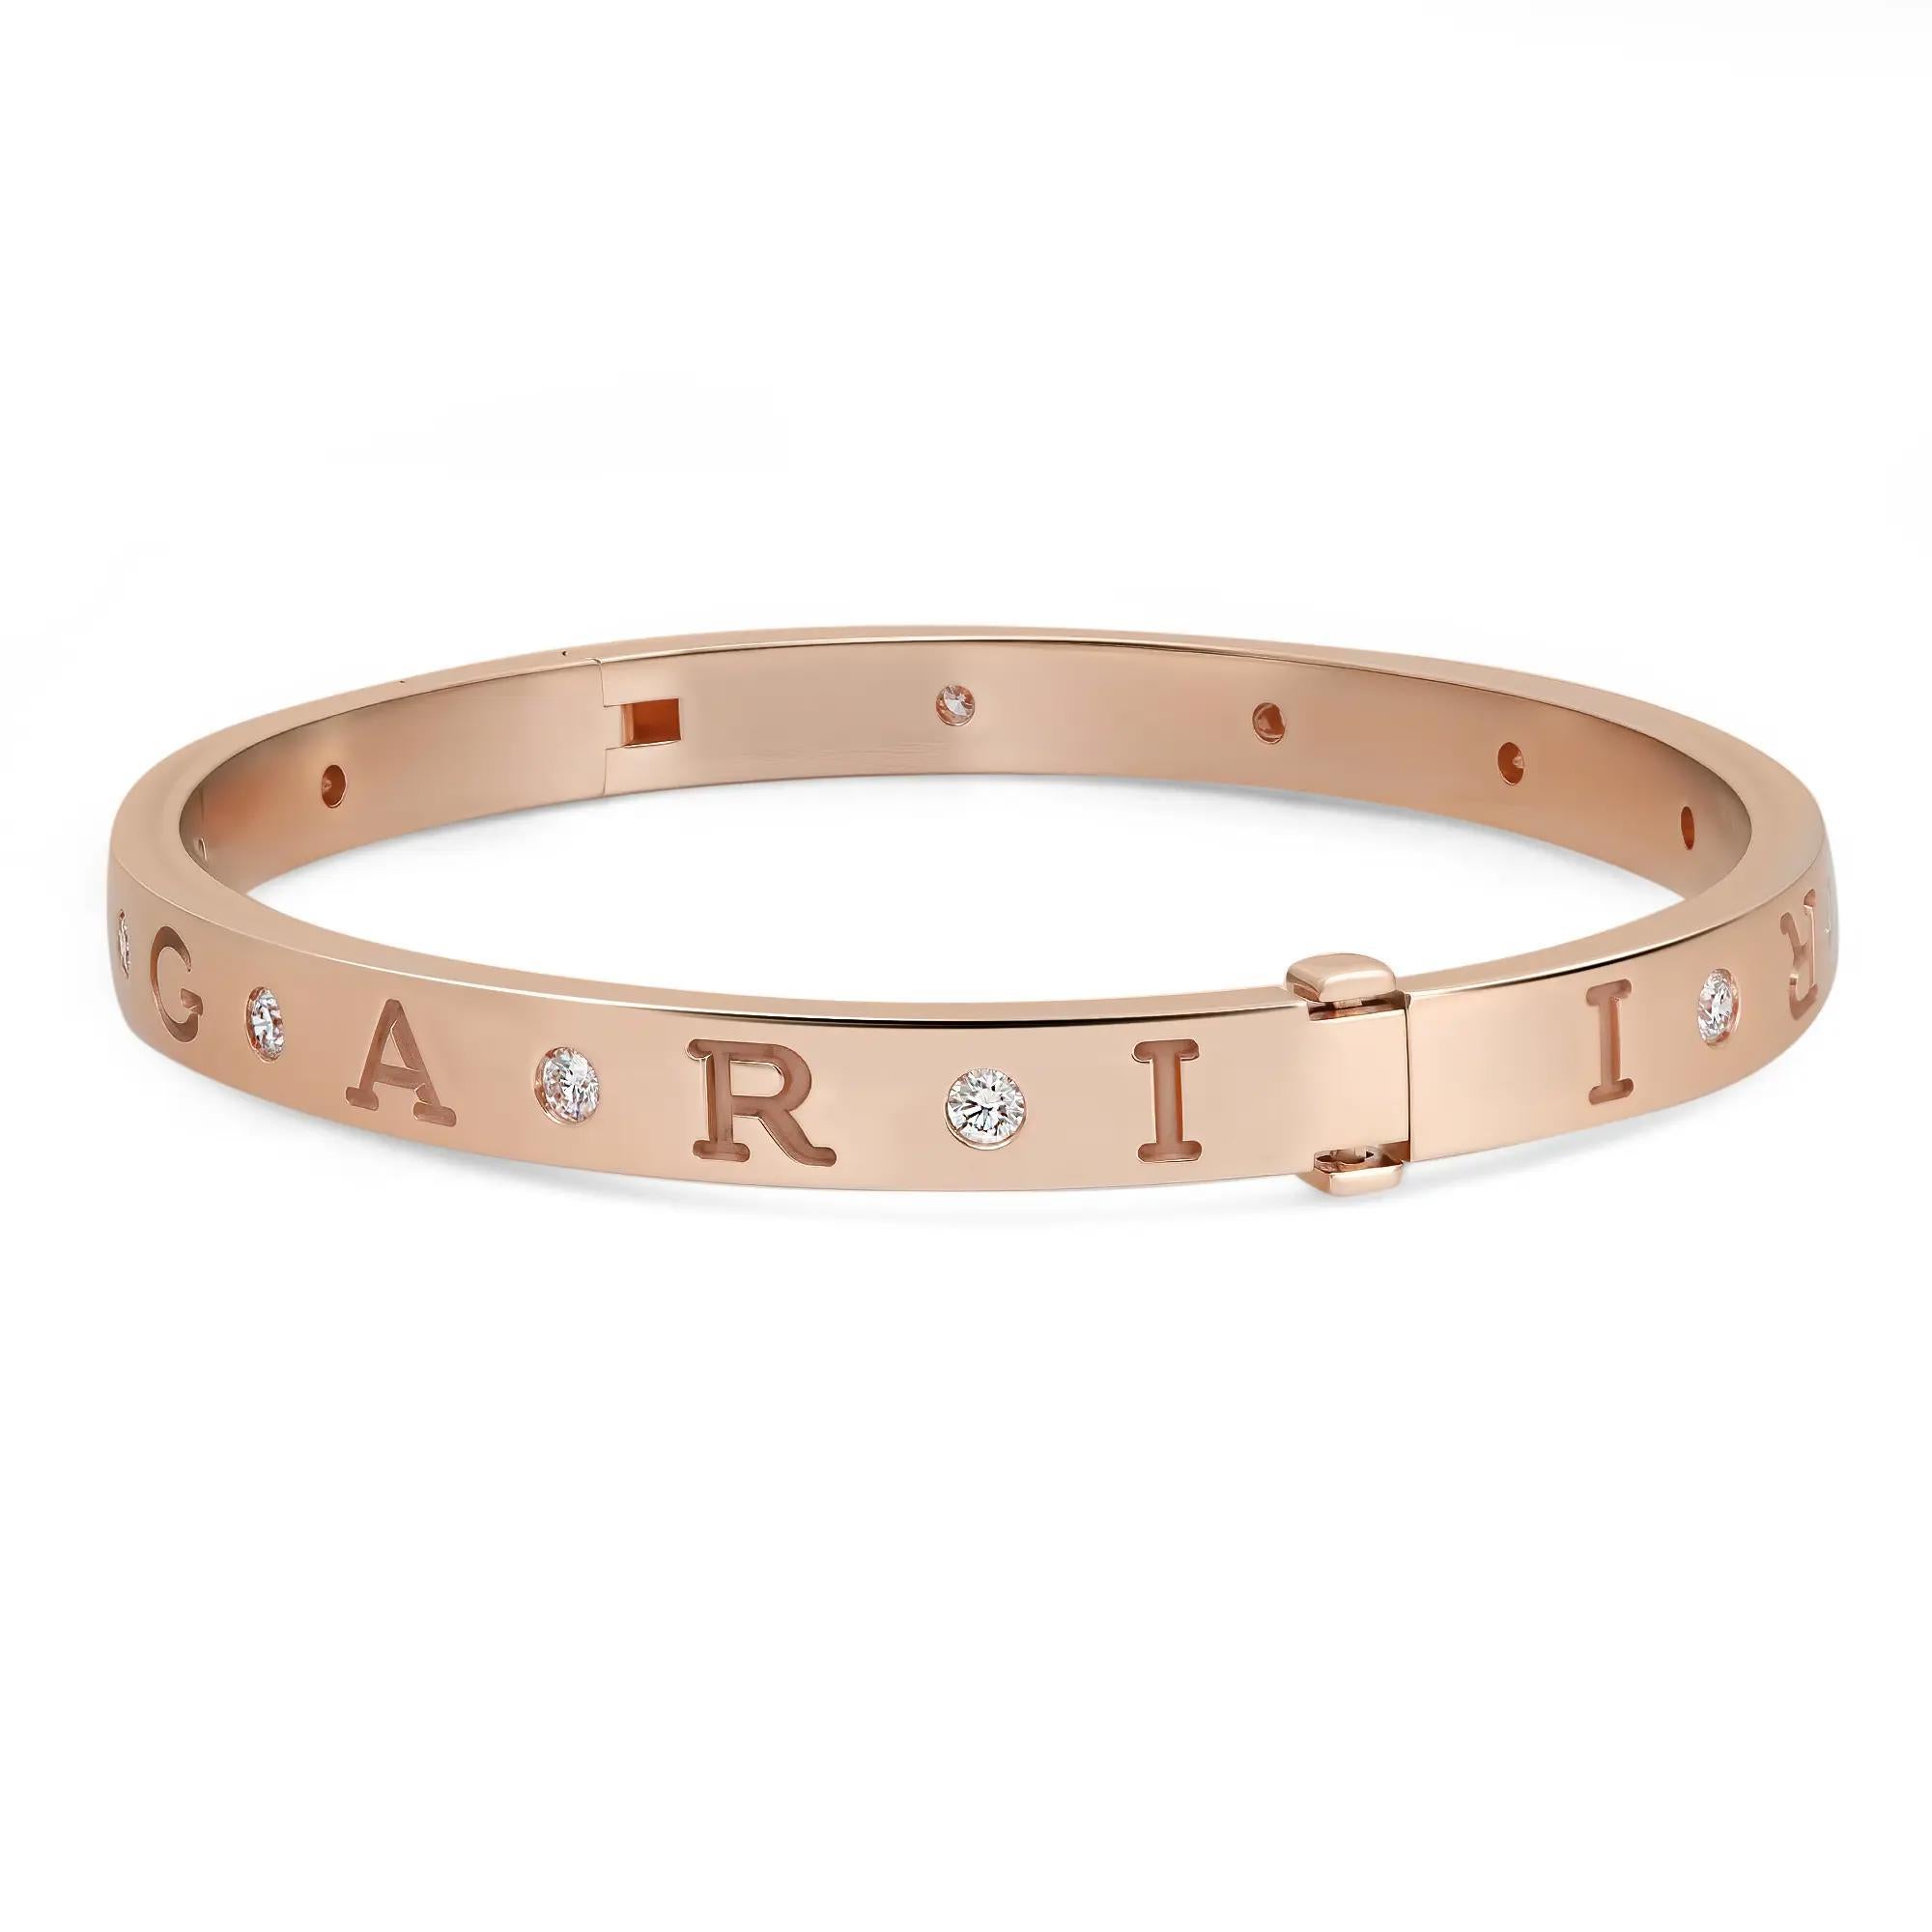 Bold and beautiful, this bracelet is a true essence of jewelry aesthetics. Crafted in lustrous 18K rose gold. This bracelet features an oval-shaped bangle studded with 12 round brilliant cut diamonds with an engraved Bvlgari logo. Super stackable